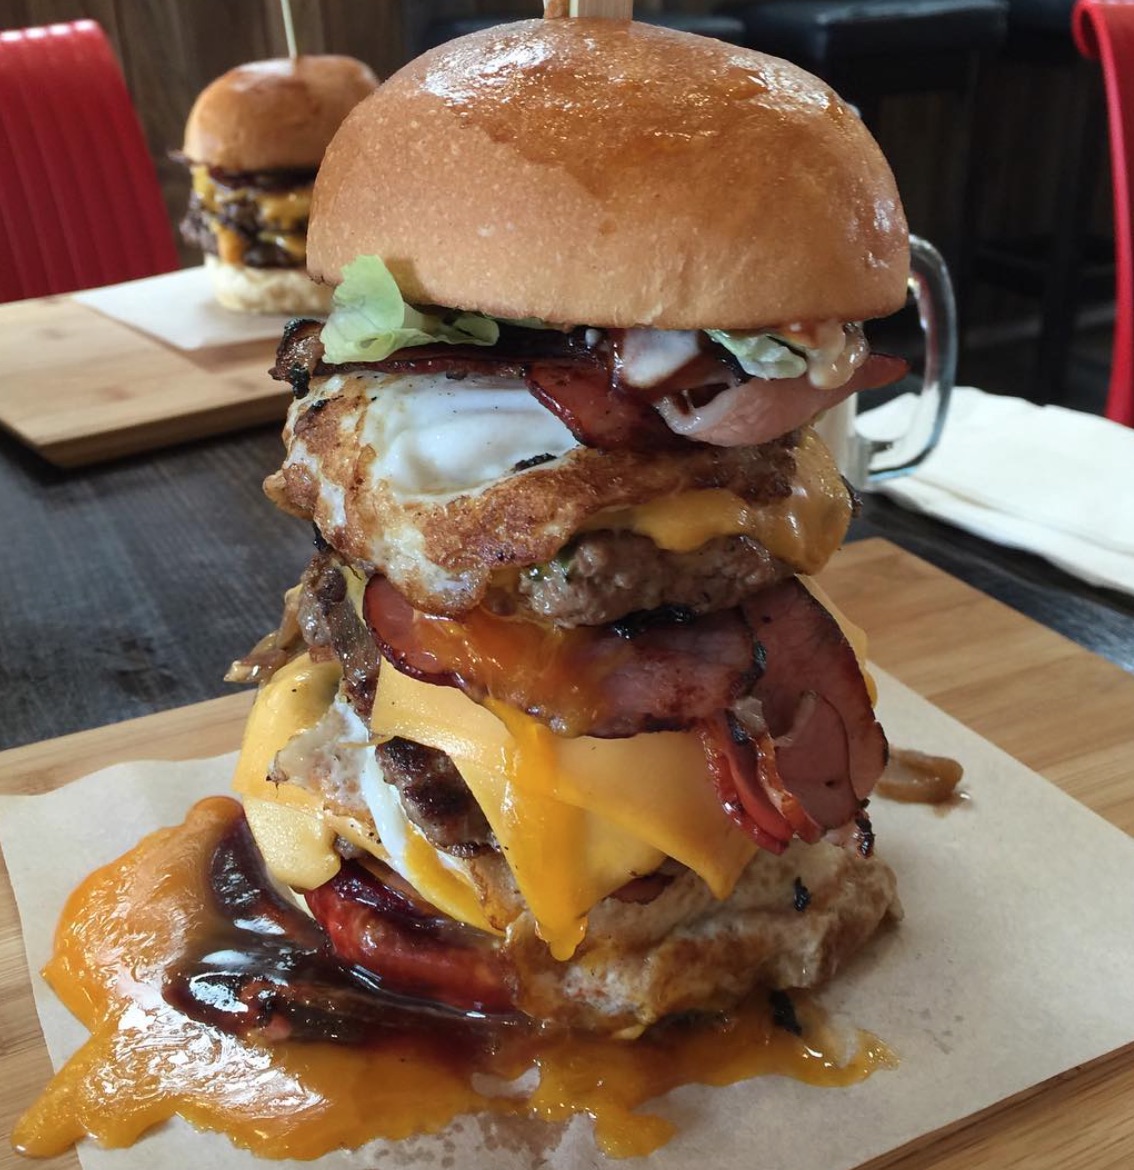 This Australian Guy Eats The Most Insane Burgers Anyone Has Ever Seen ...